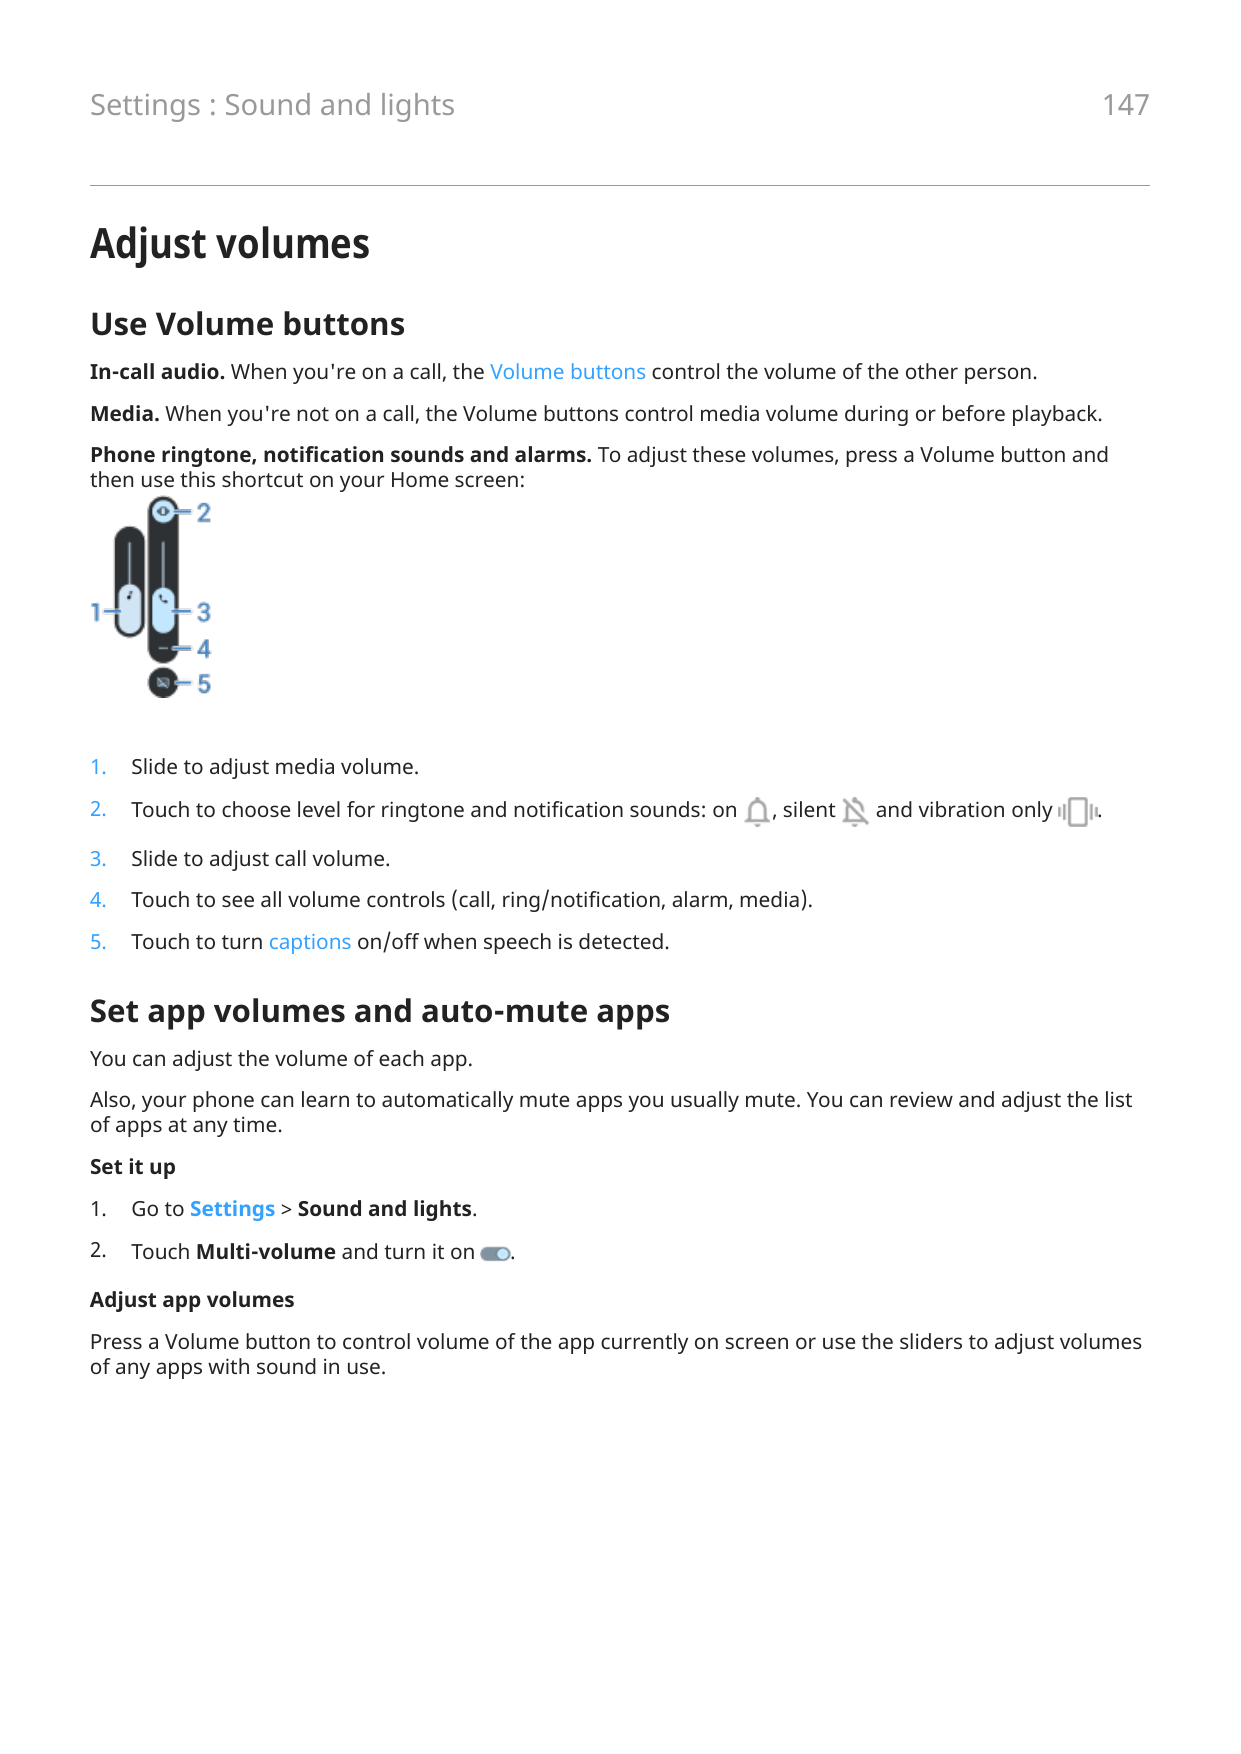 147Settings : Sound and lightsAdjust volumesUse Volume buttonsIn-call audio. When you're on a call, the Volume buttons control t